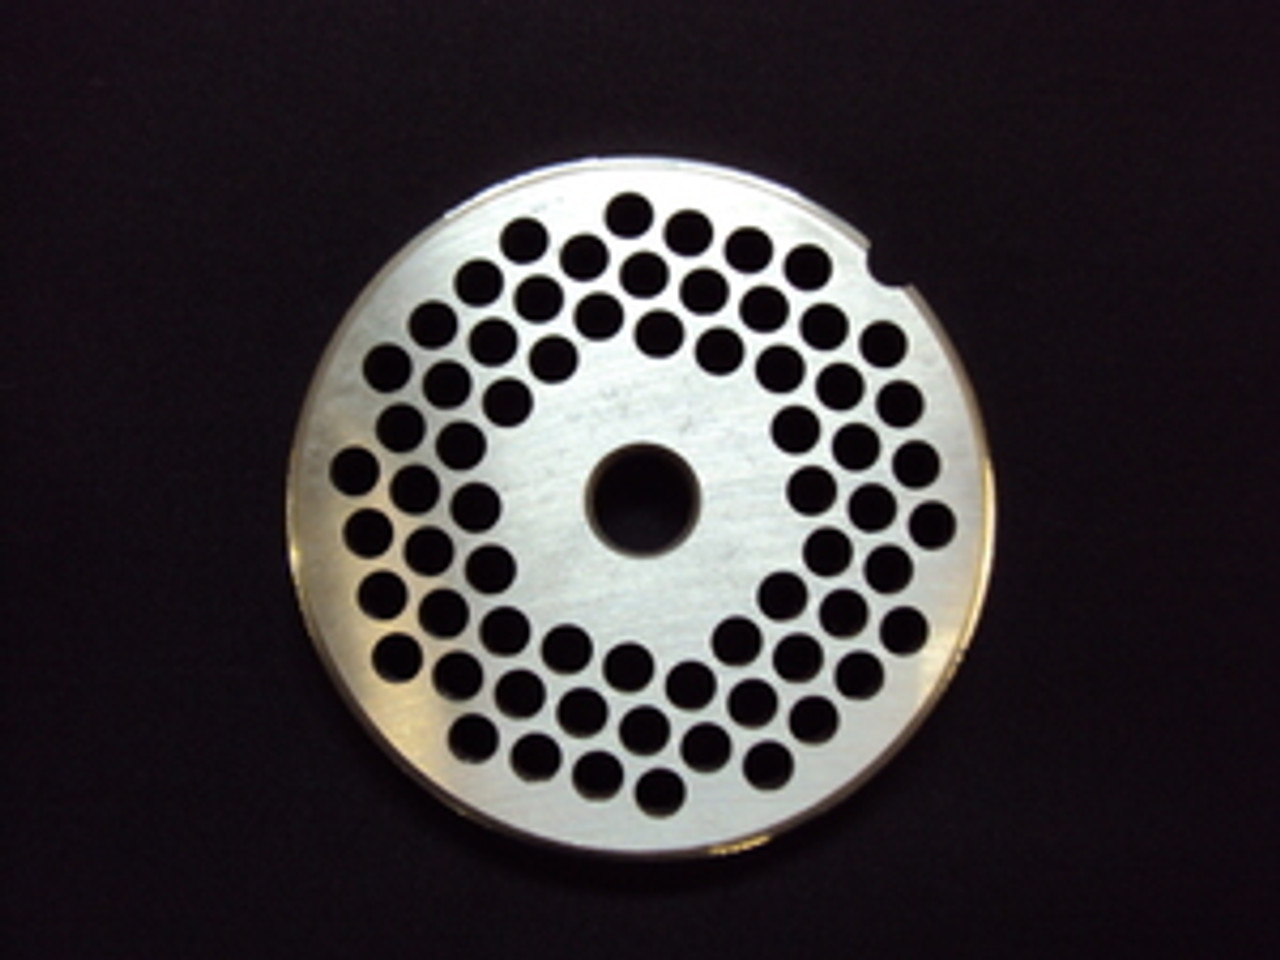 # 32 x 3/16" Reversible Grinder Plate - Stainless